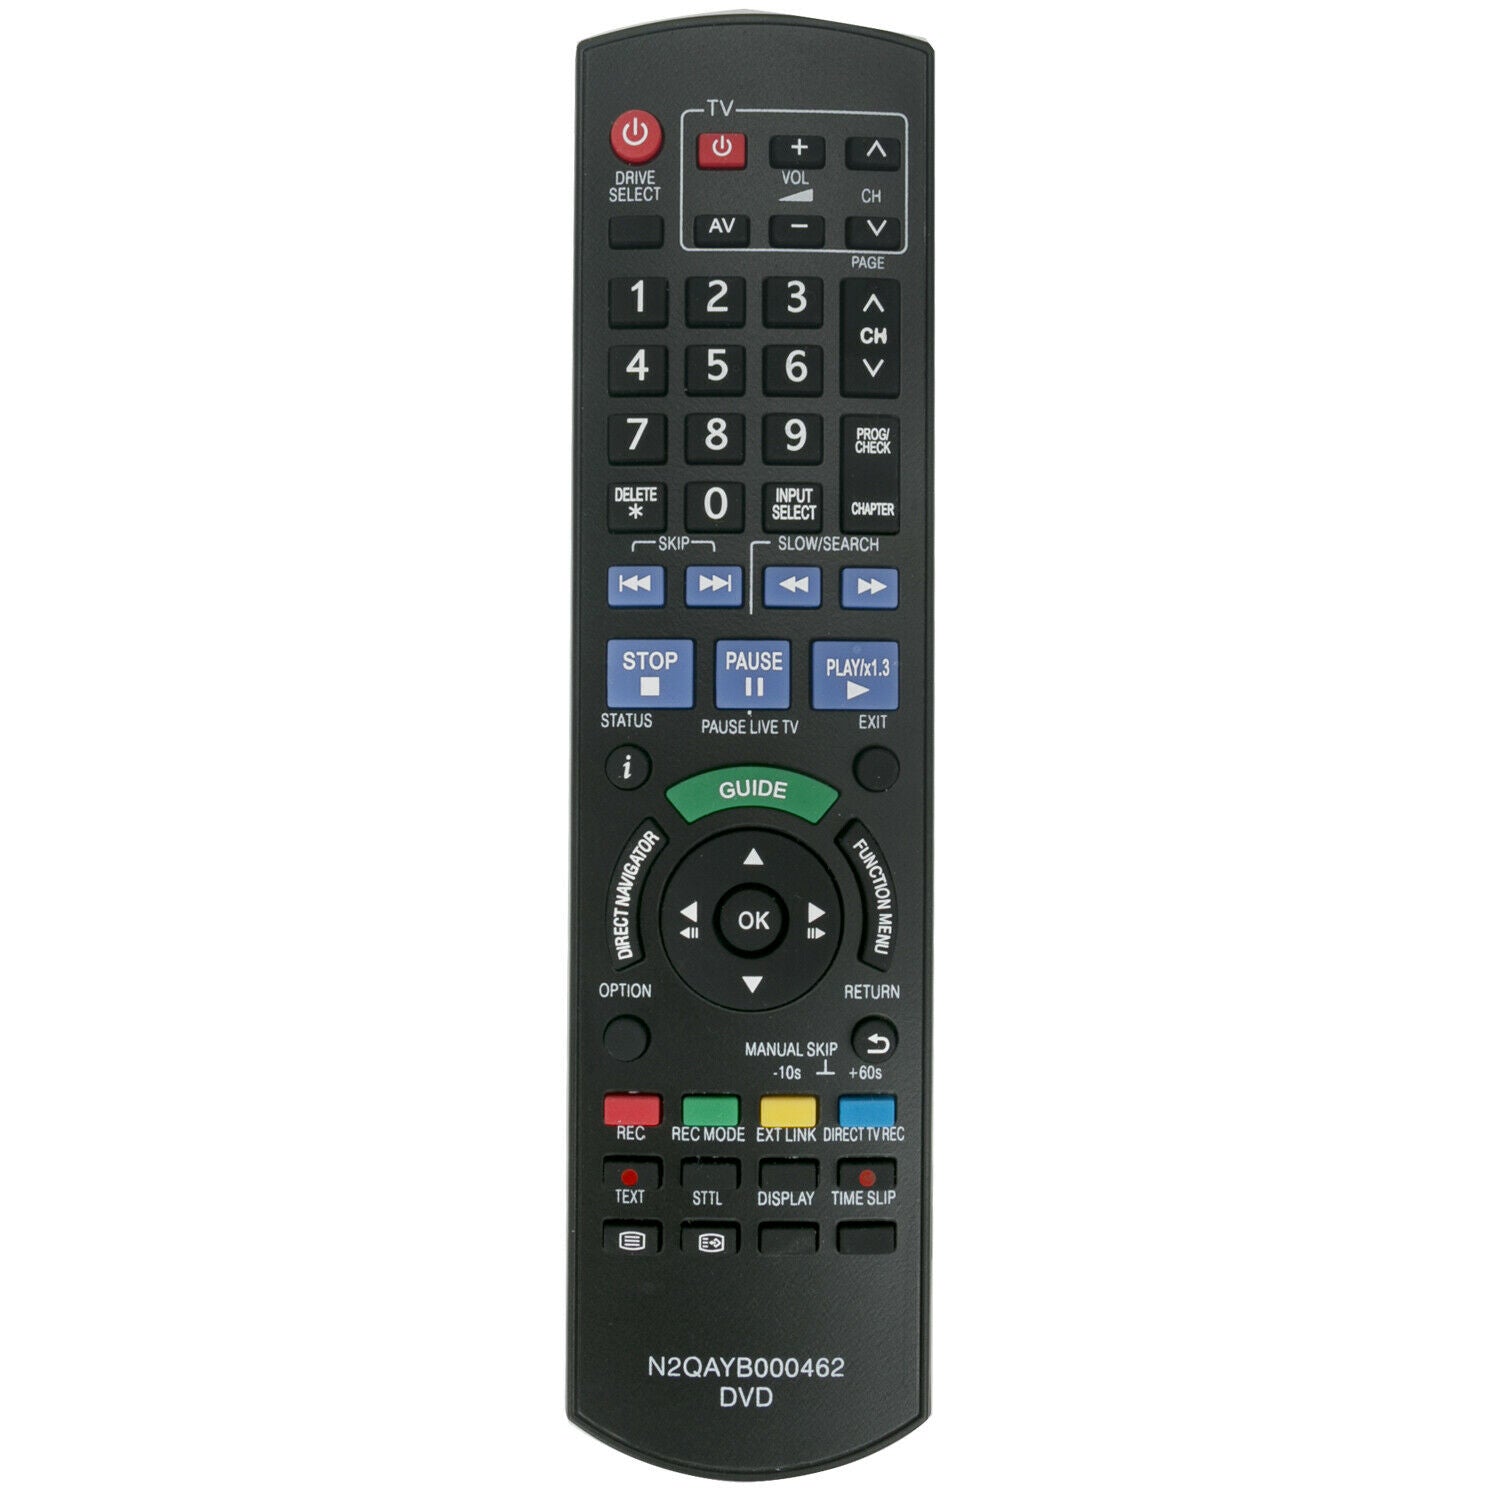 N2QAYB000462 Replacement Remote Control for Panasonic DMR-EX769EB DMR-EX79 Replaced By N2QAYB000127